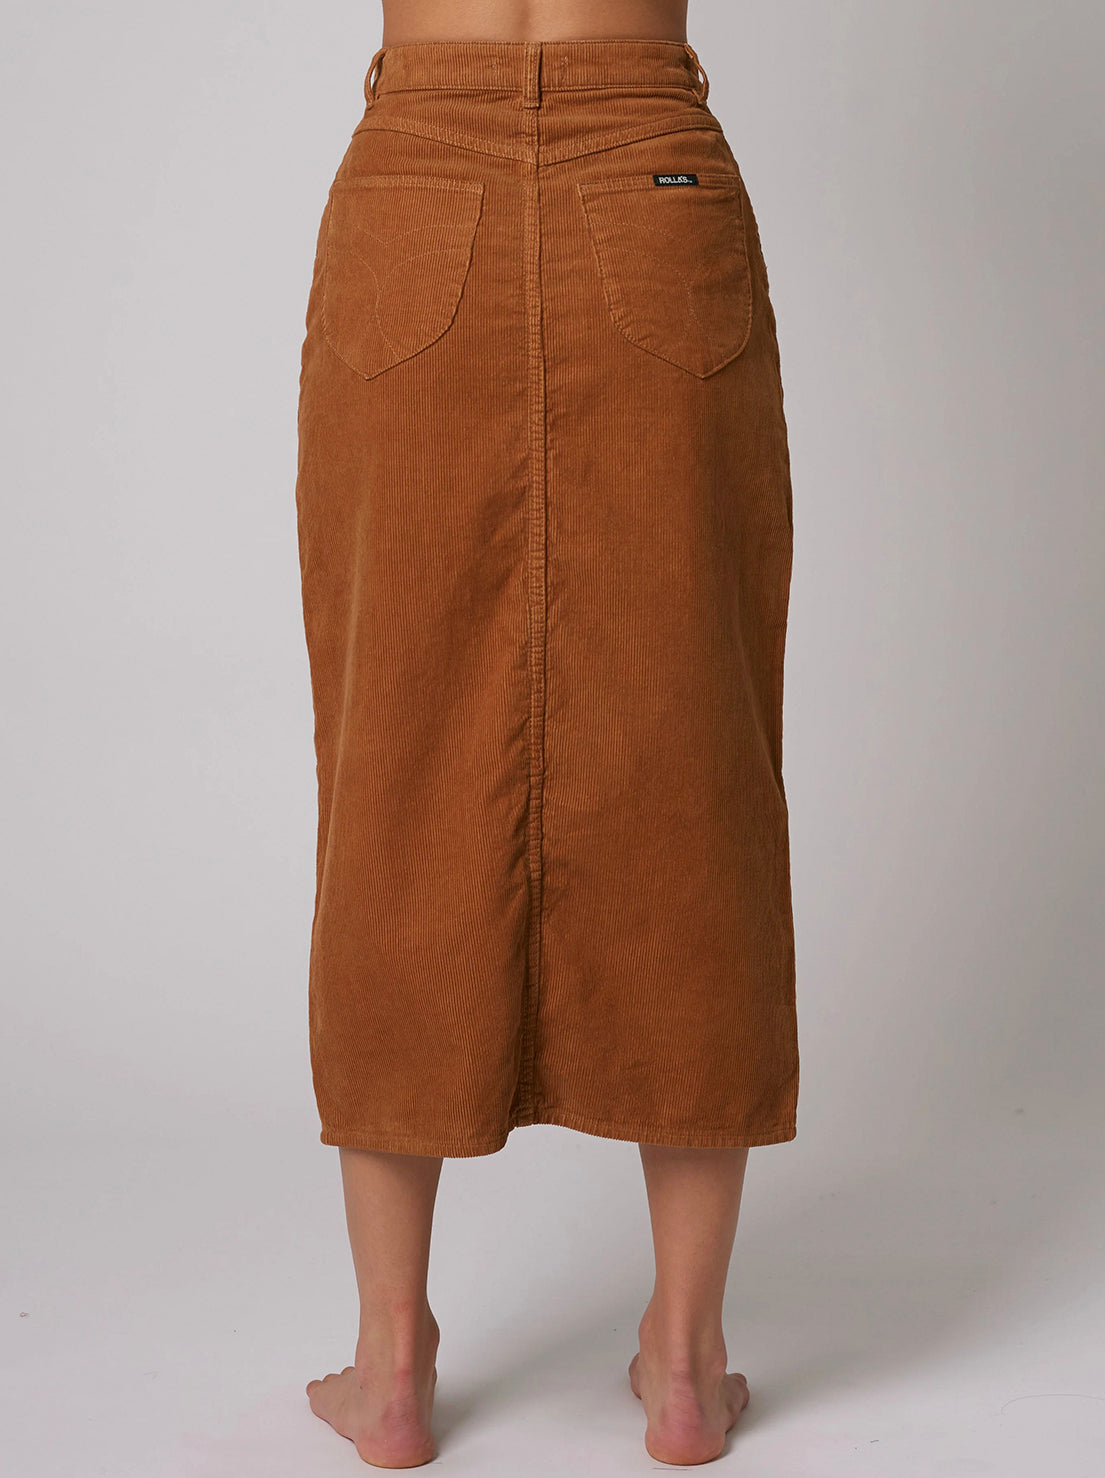 Rolla's - Chicago Skirt - Tan Cord